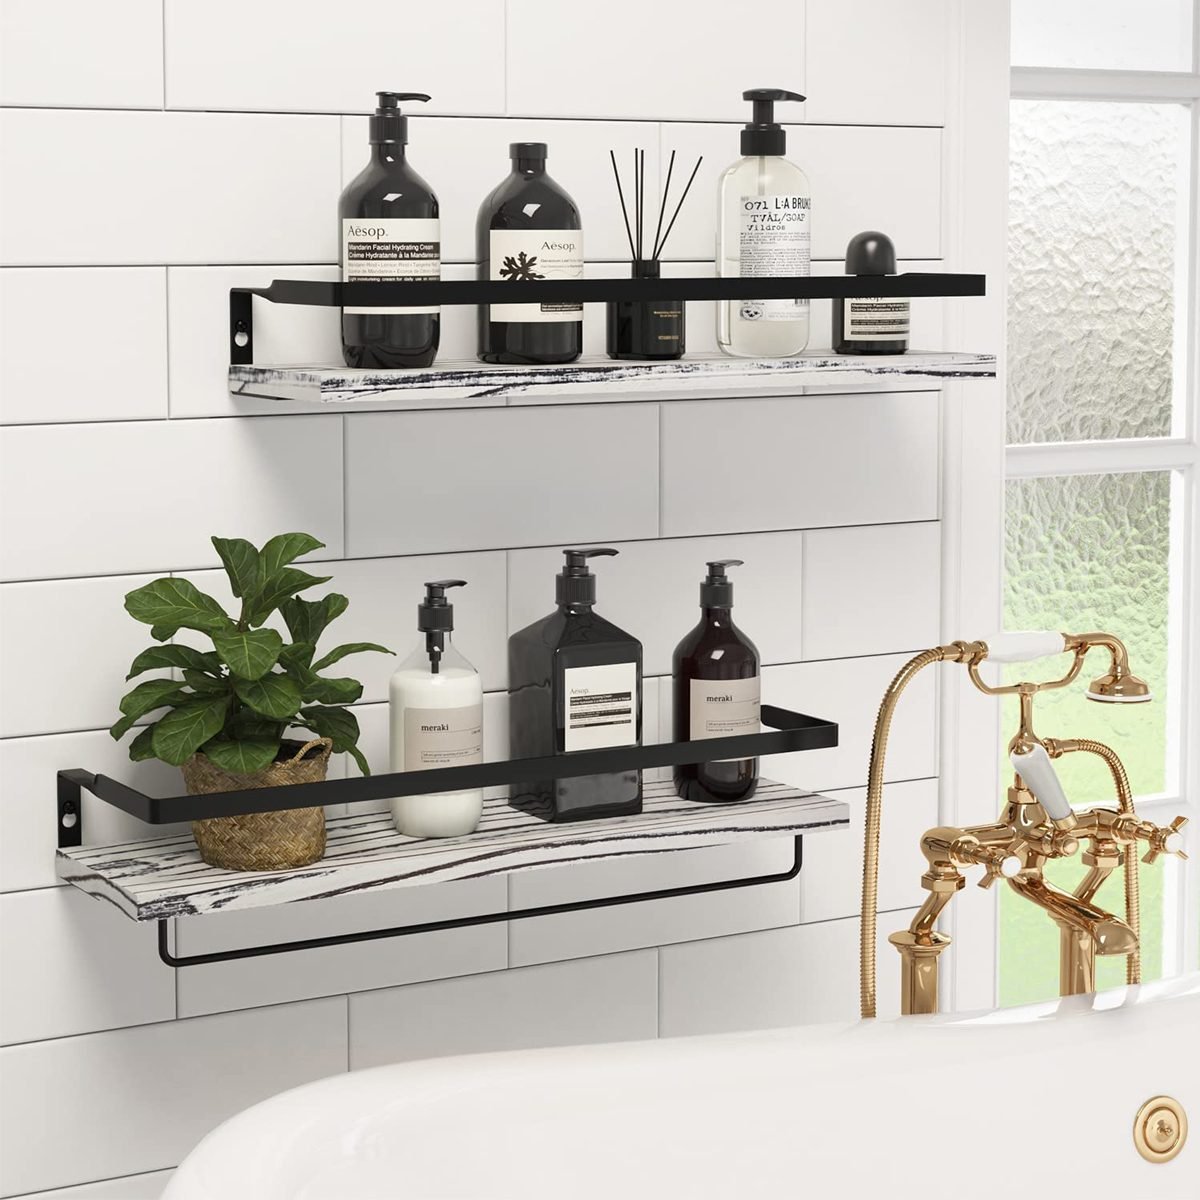 13 Bathroom Storage Ideas For Small Space - Homewhis